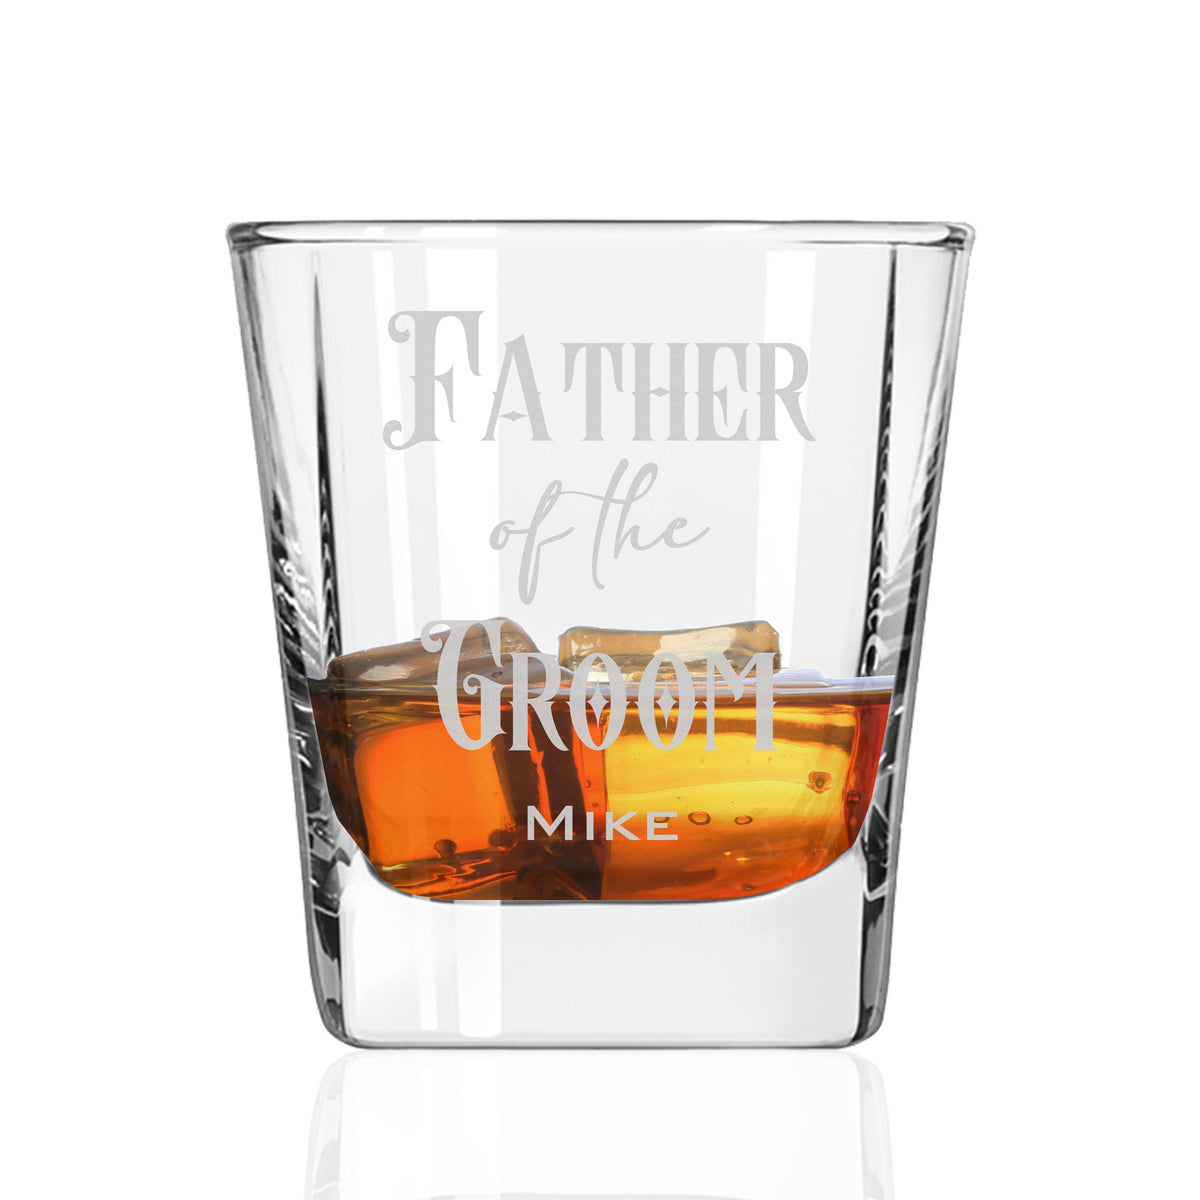 Father of the Groom or Bride Whiskey Glasses / Engraved Rocks Glass 9.25 oz. Wedding whiskey glasses, Wedding gift for dad